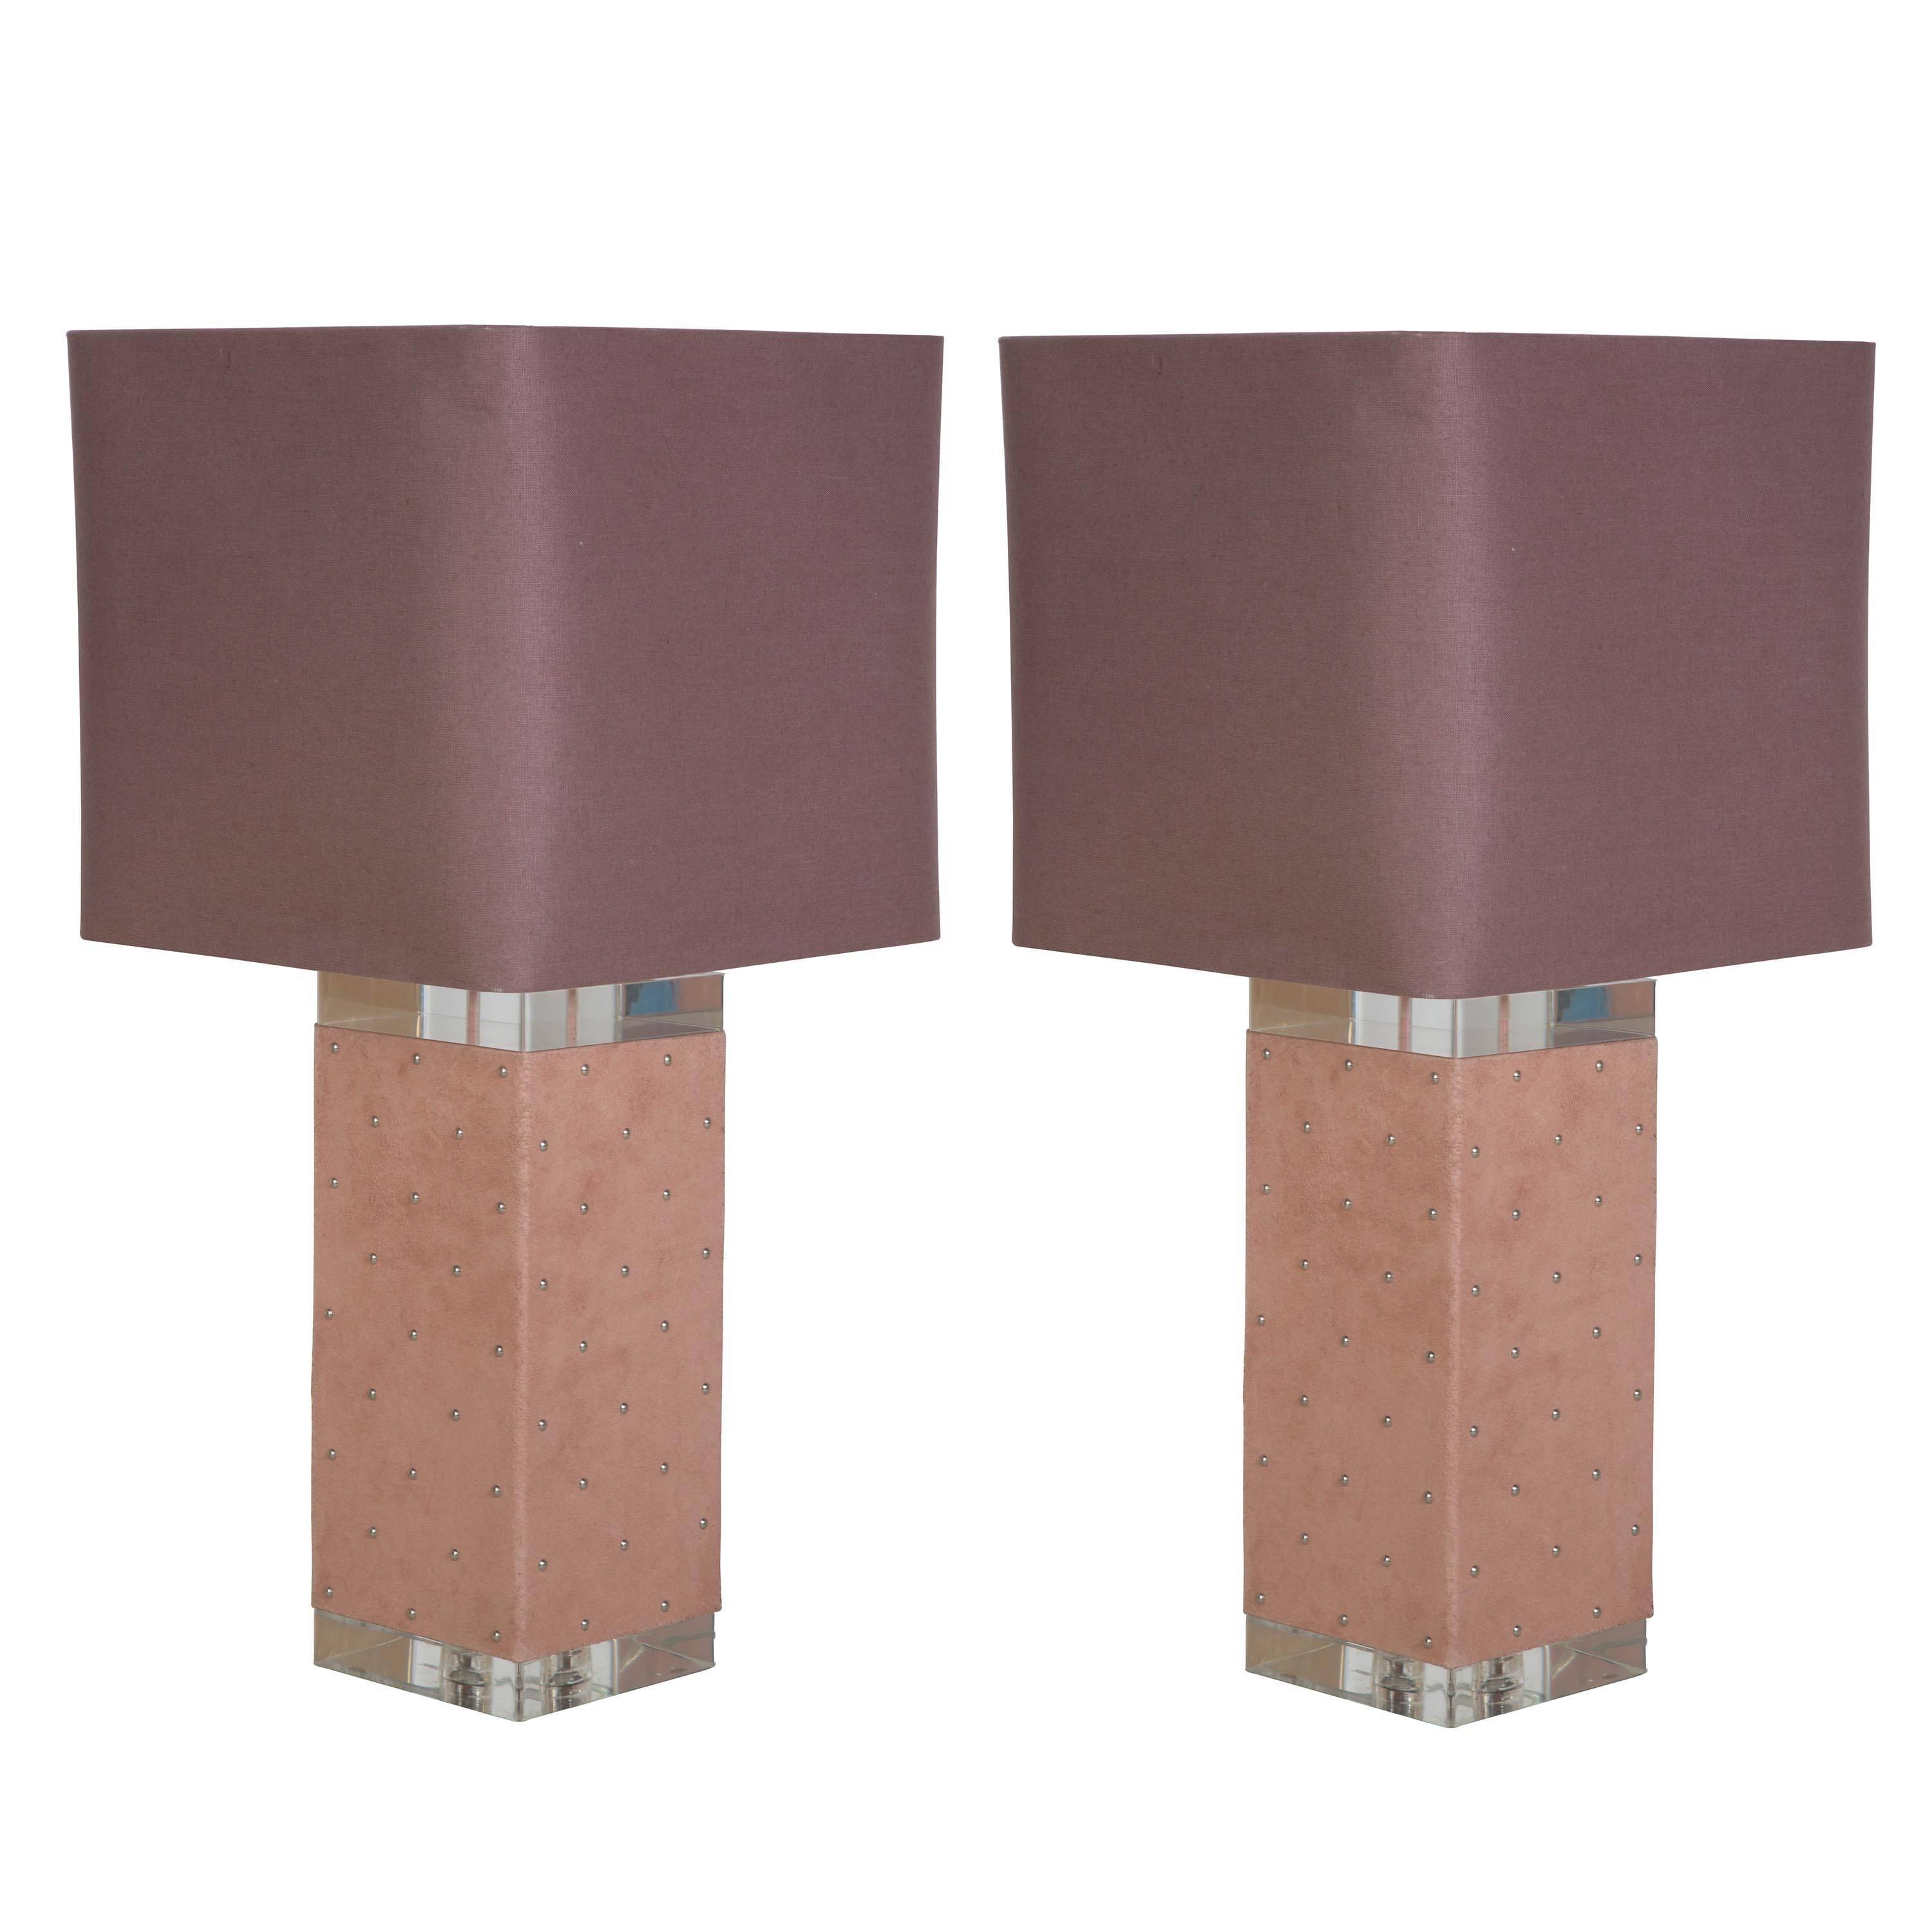 A pair of large 1970s square, suede wrapped, Lucite table lamps with studded detail.